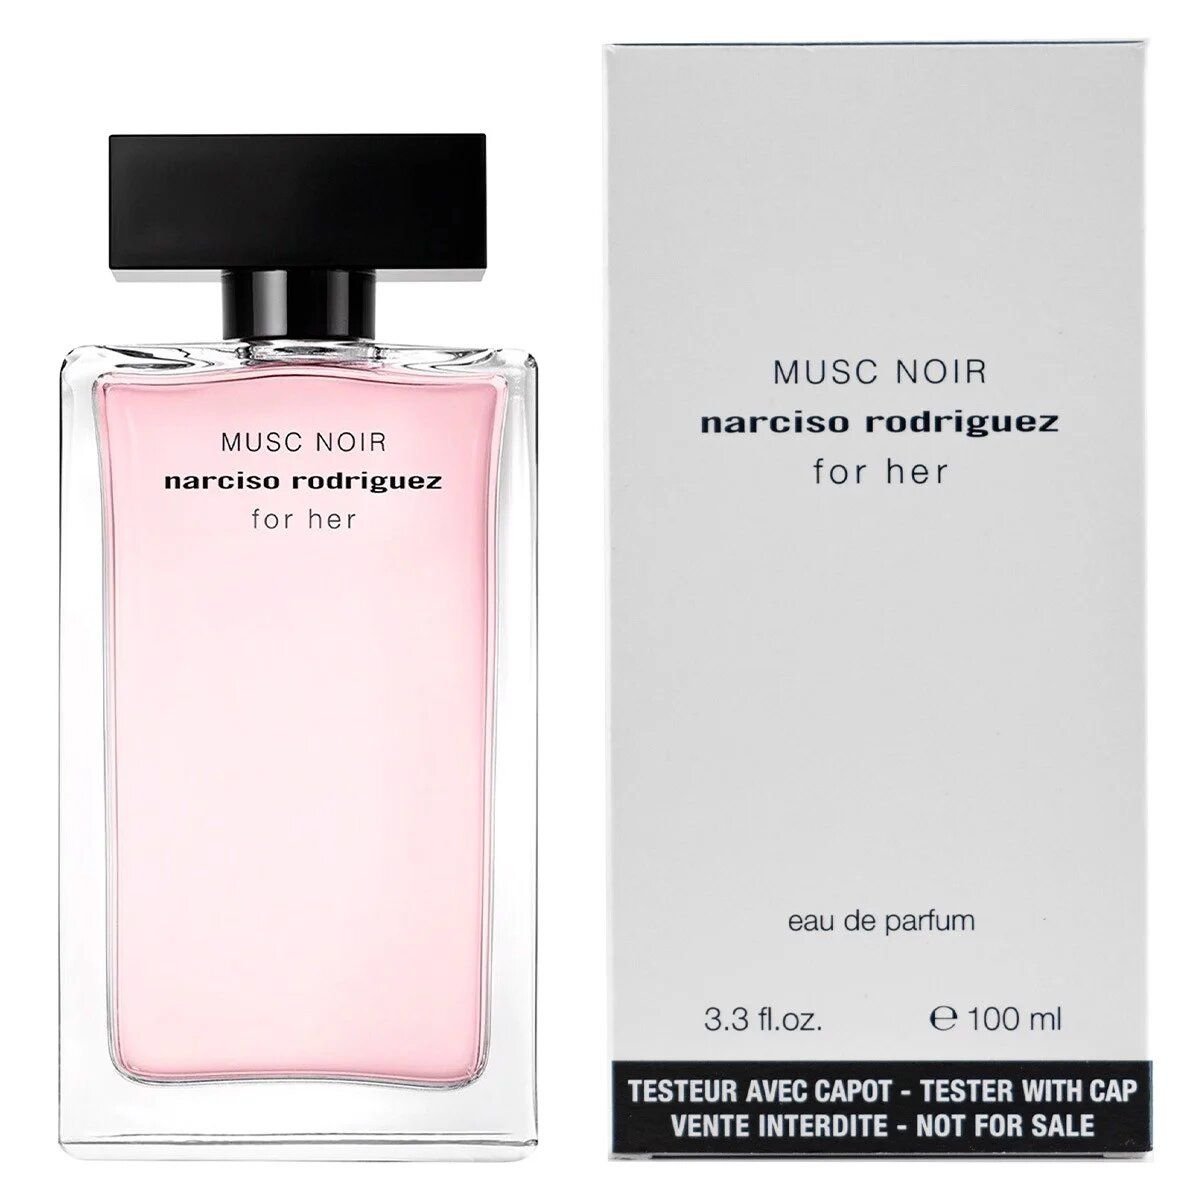 All of me narciso rodriguez. Narciso Rodriguez Musc Noir for her Eau de Parfum. МУСК Ноир нарциссо Родригес. Narciso Rodriguez Musc Noir Rose for her EDP 100 ml. Musc Noir Narciso Rodriguez Tester.